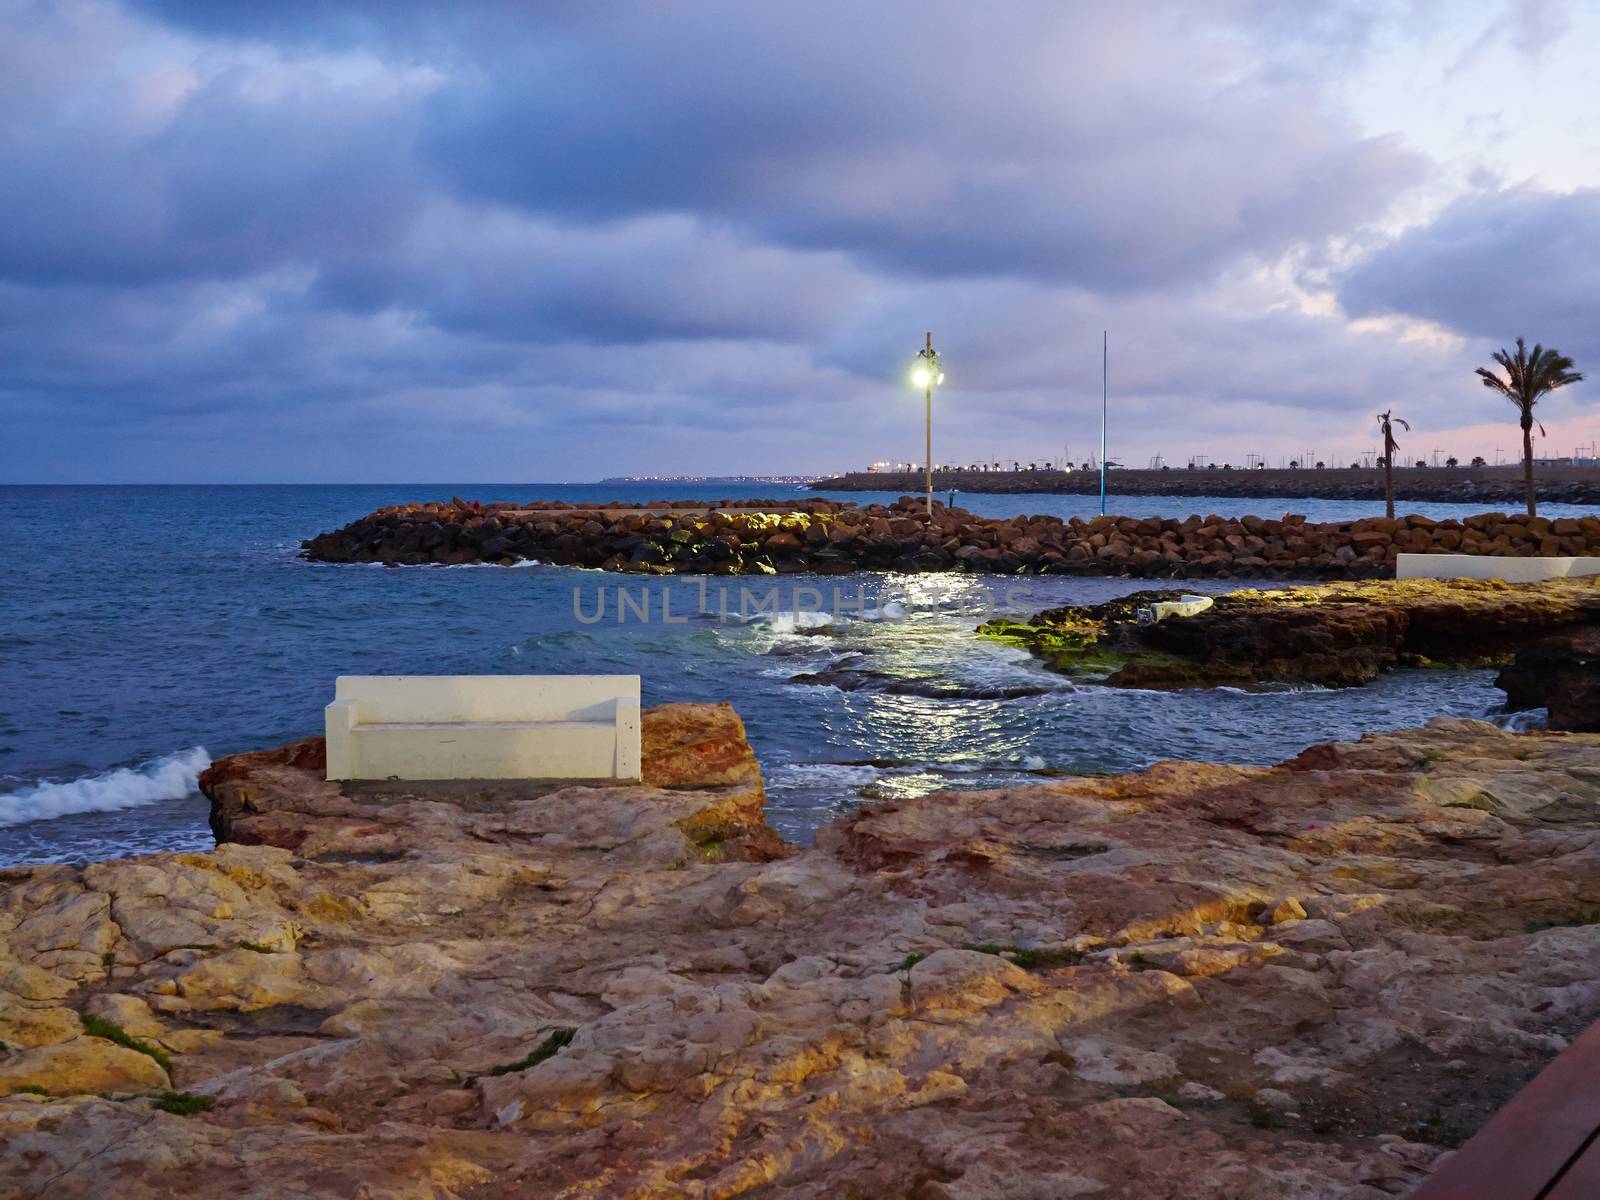 Bench made of stone in beautiful Torrevieja beach, Costa Blanca, by Ronyzmbow